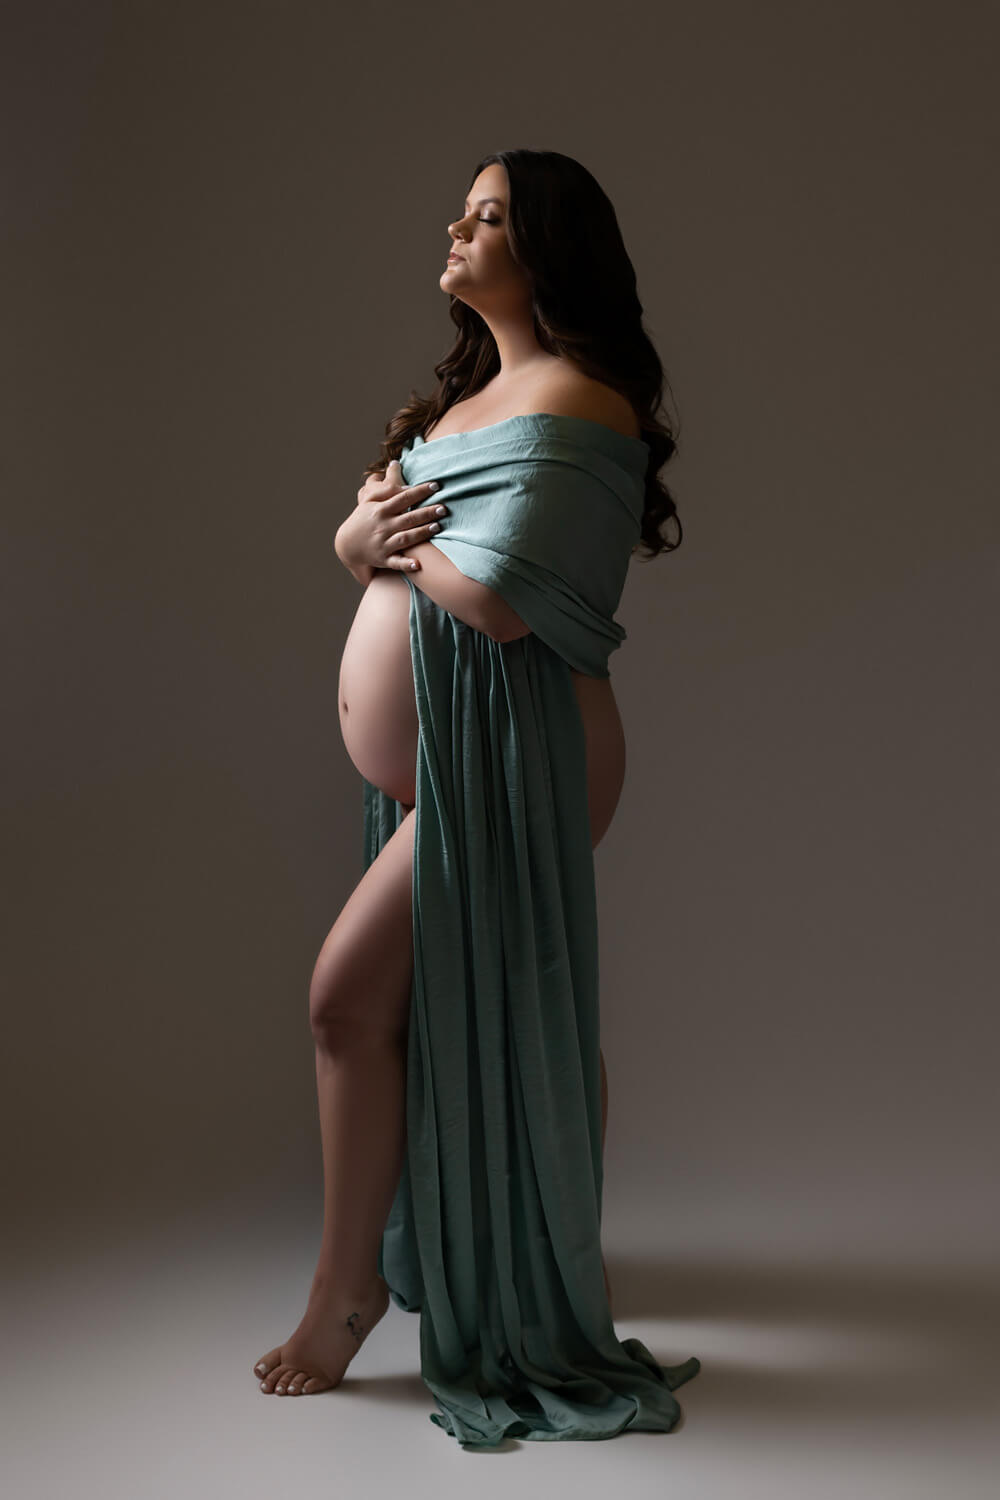 woman posed with draped fabric in maternity photoshoot